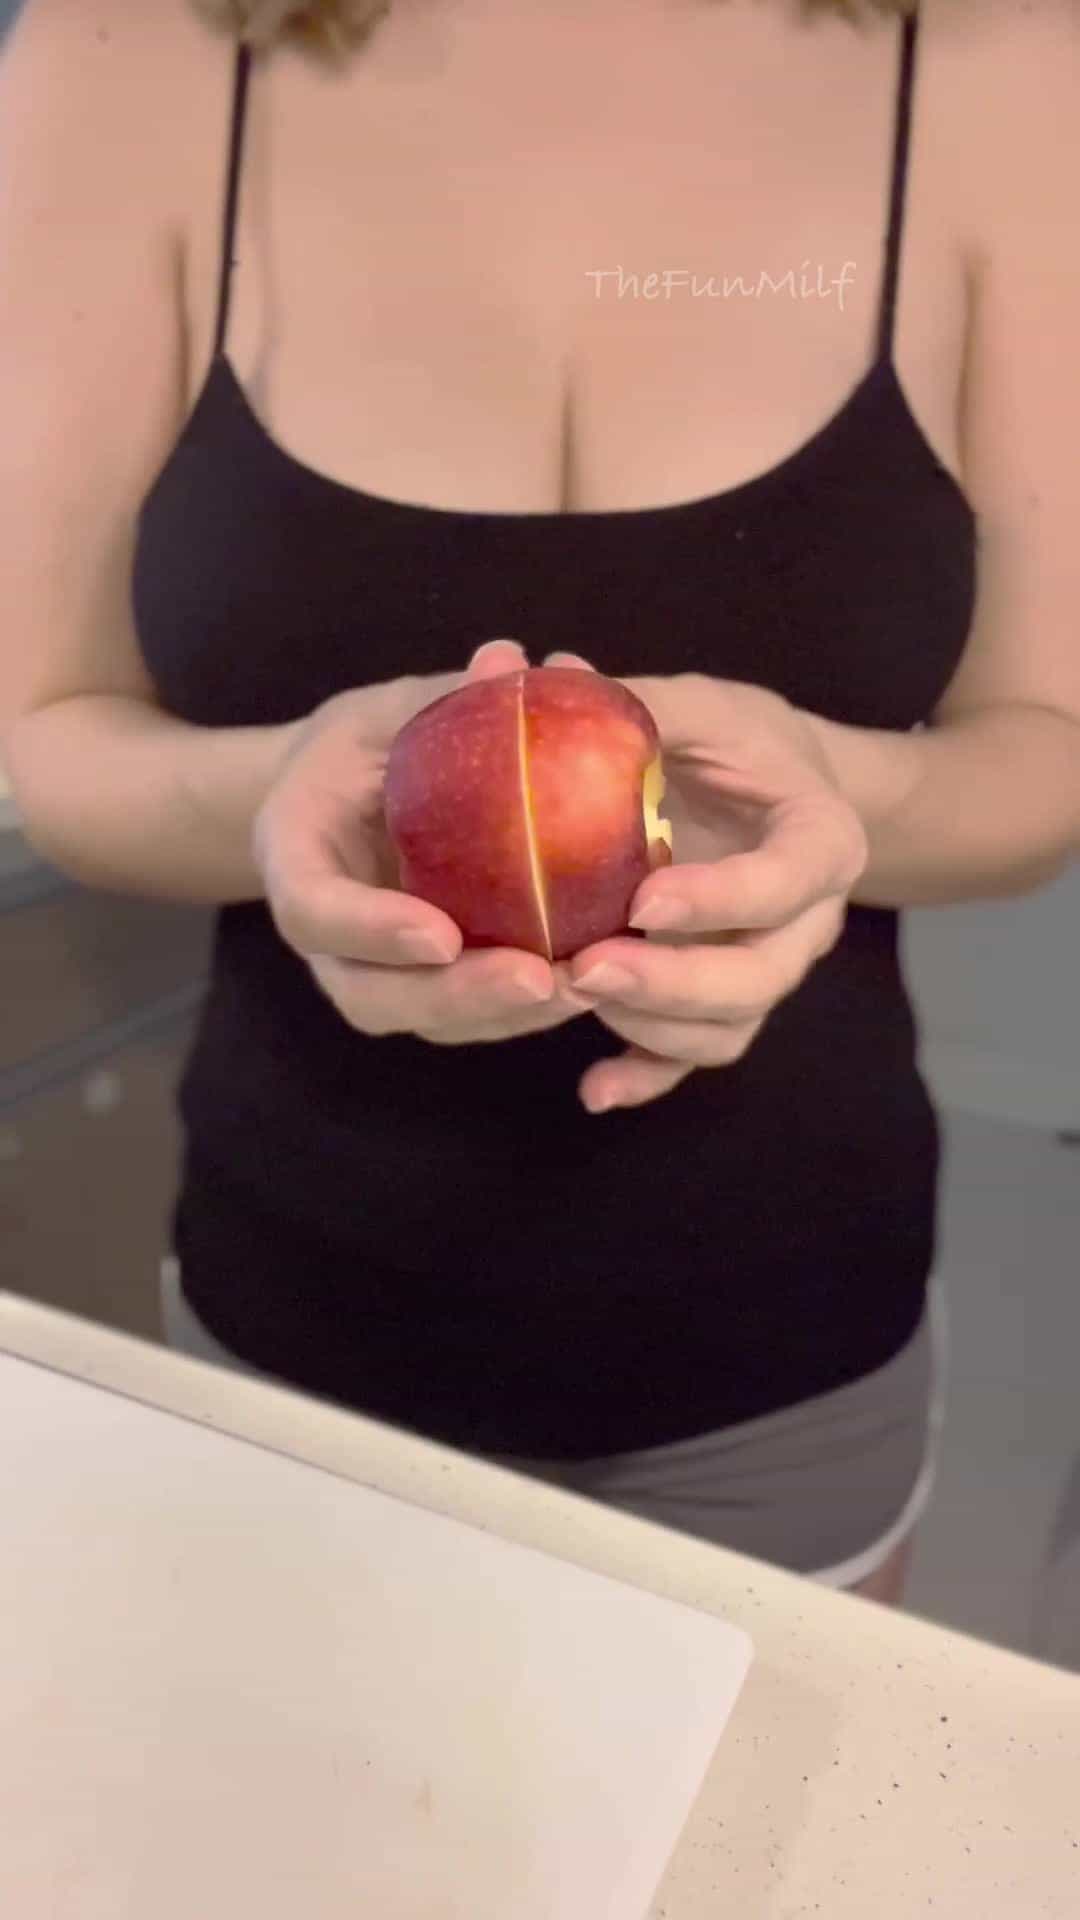 Did you even notice the apple!